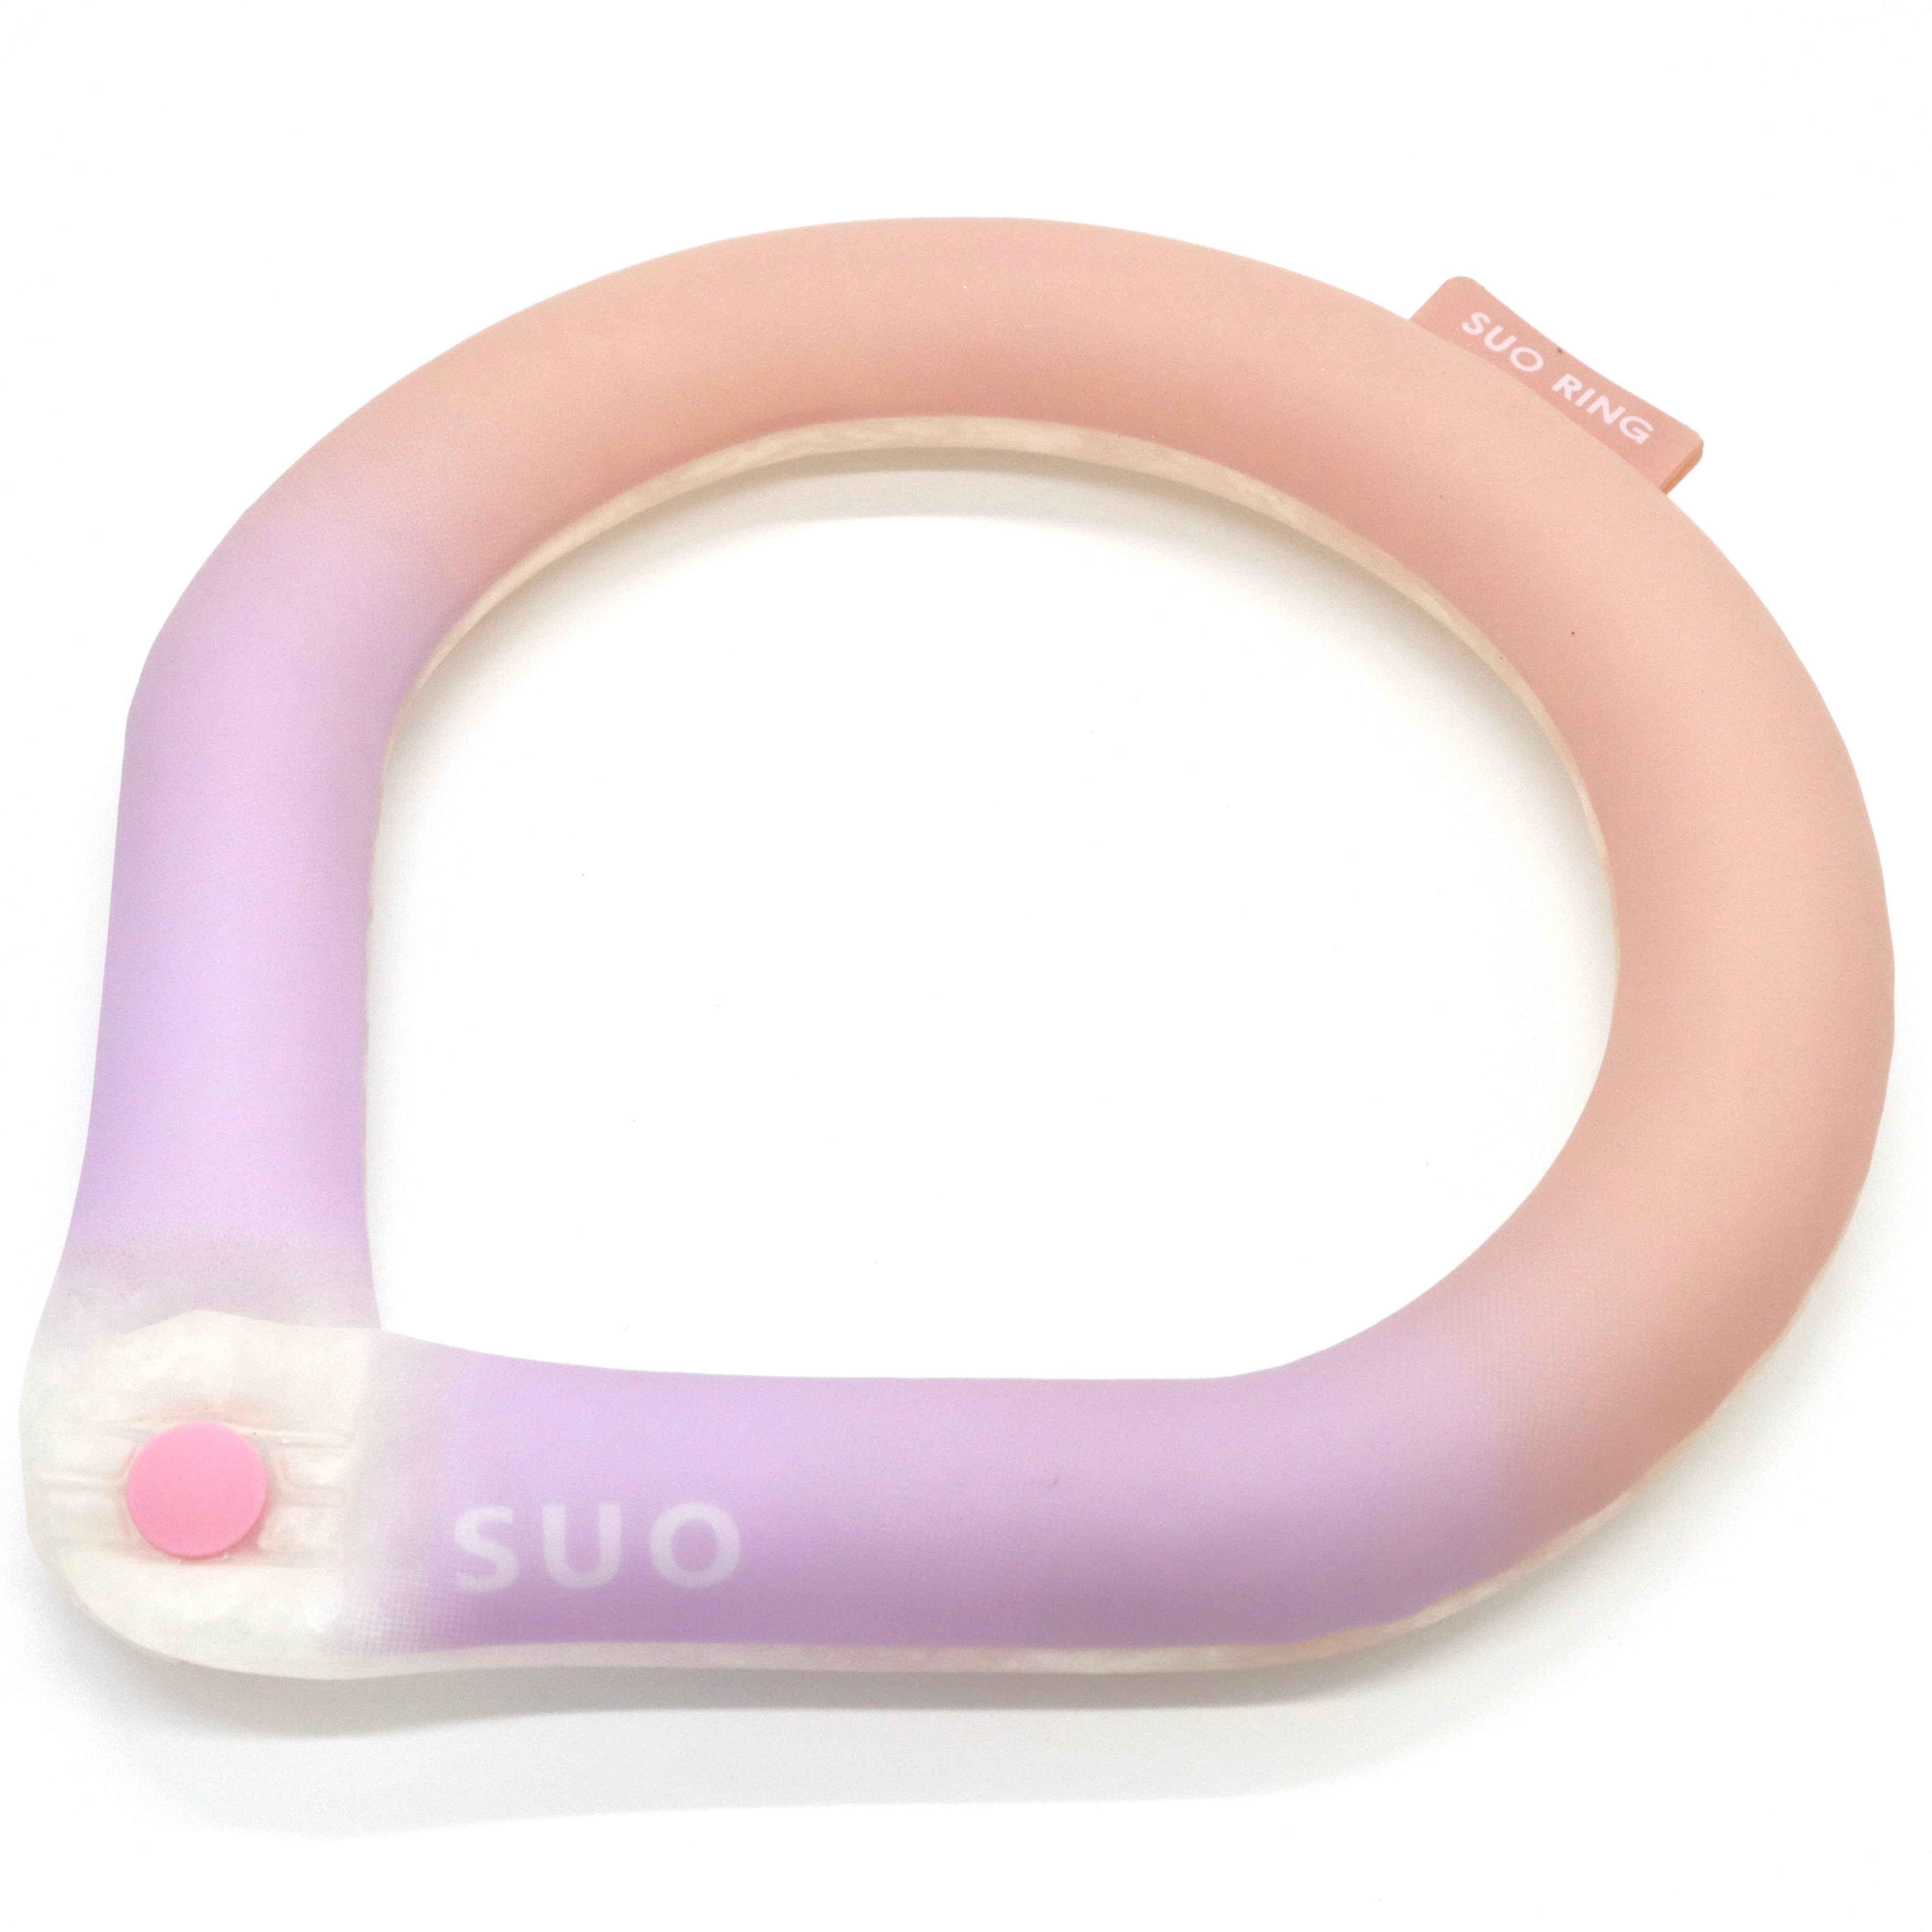 SUO RING 28°ICE for dogs gradation ボタン付